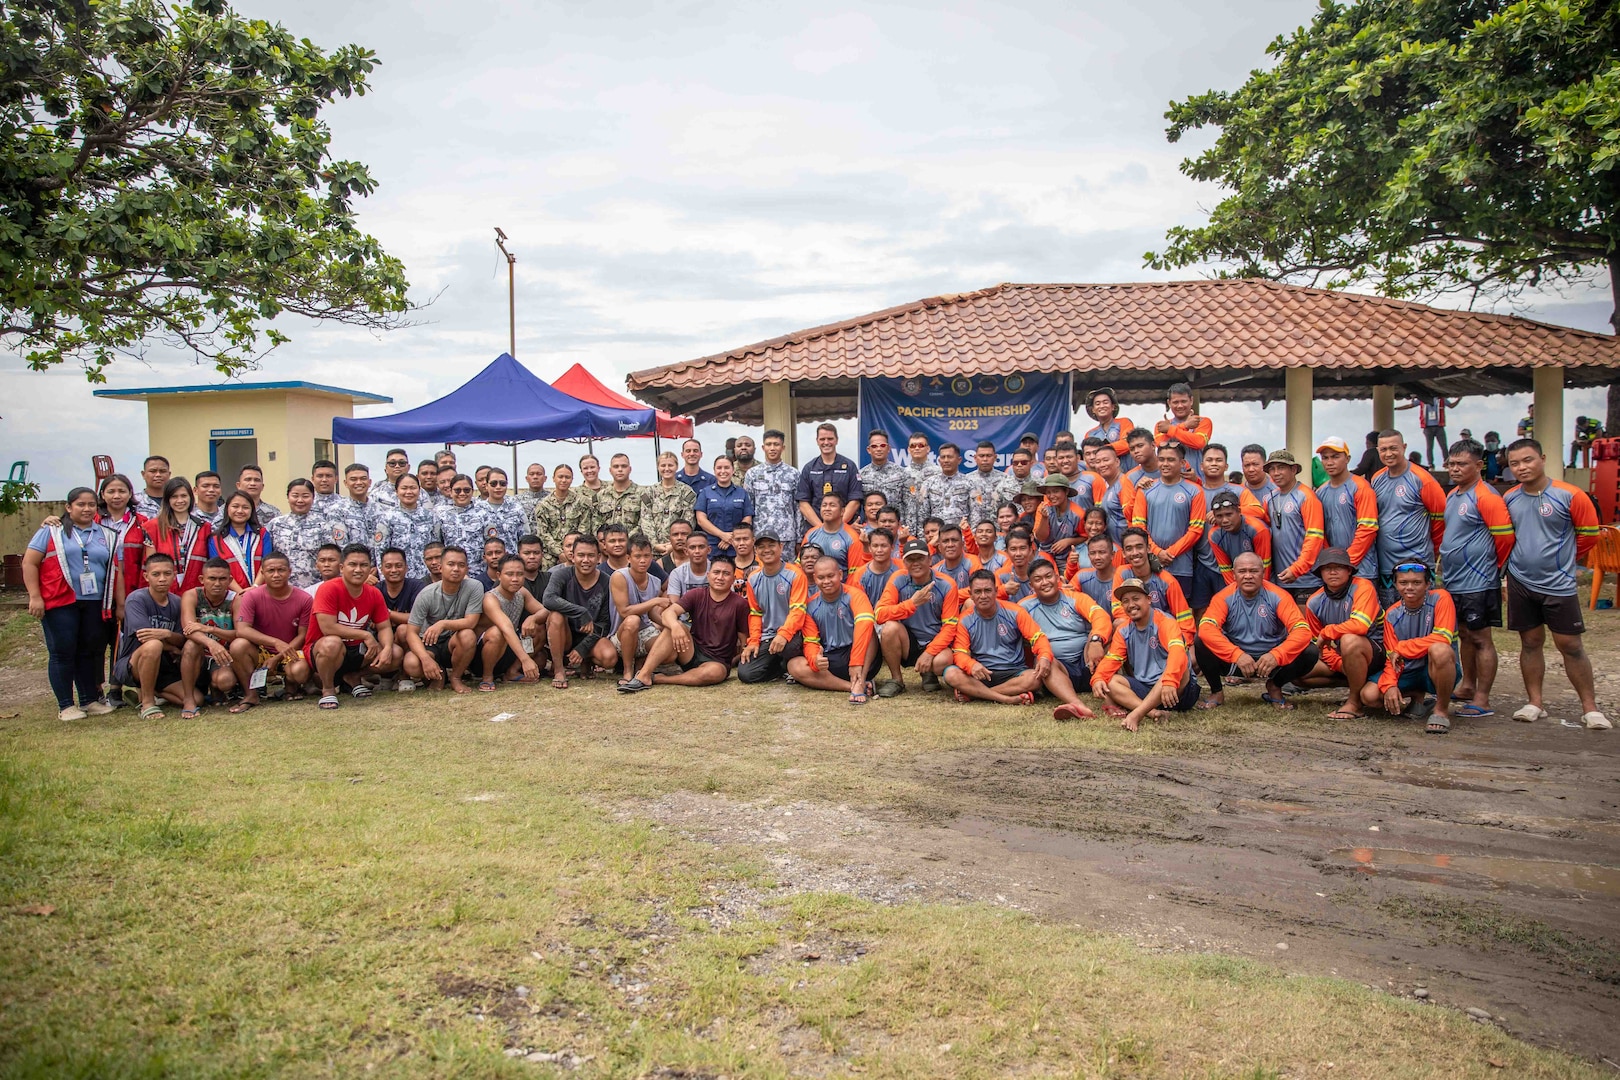 LA UNION, Philippines (Aug. 29, 2023) - Capt. Joseph Dransfield, Pacific Partnership 2023 Deputy Mission Commander, U.S. Navy, Filipino Coast Guard and Filipino Navy pose for a group photo after water search and rescue exercise at San Fernando Coast Guard Station, Aug 29. Now in its 18th year, Pacific Partnership is the largest annual multinational humanitarian assistance and disaster relief preparedness mission conducted in the Indo-Pacific. (U.S. Navy Photo by Mass Communication Specialist 2nd Class Megan Alexander)